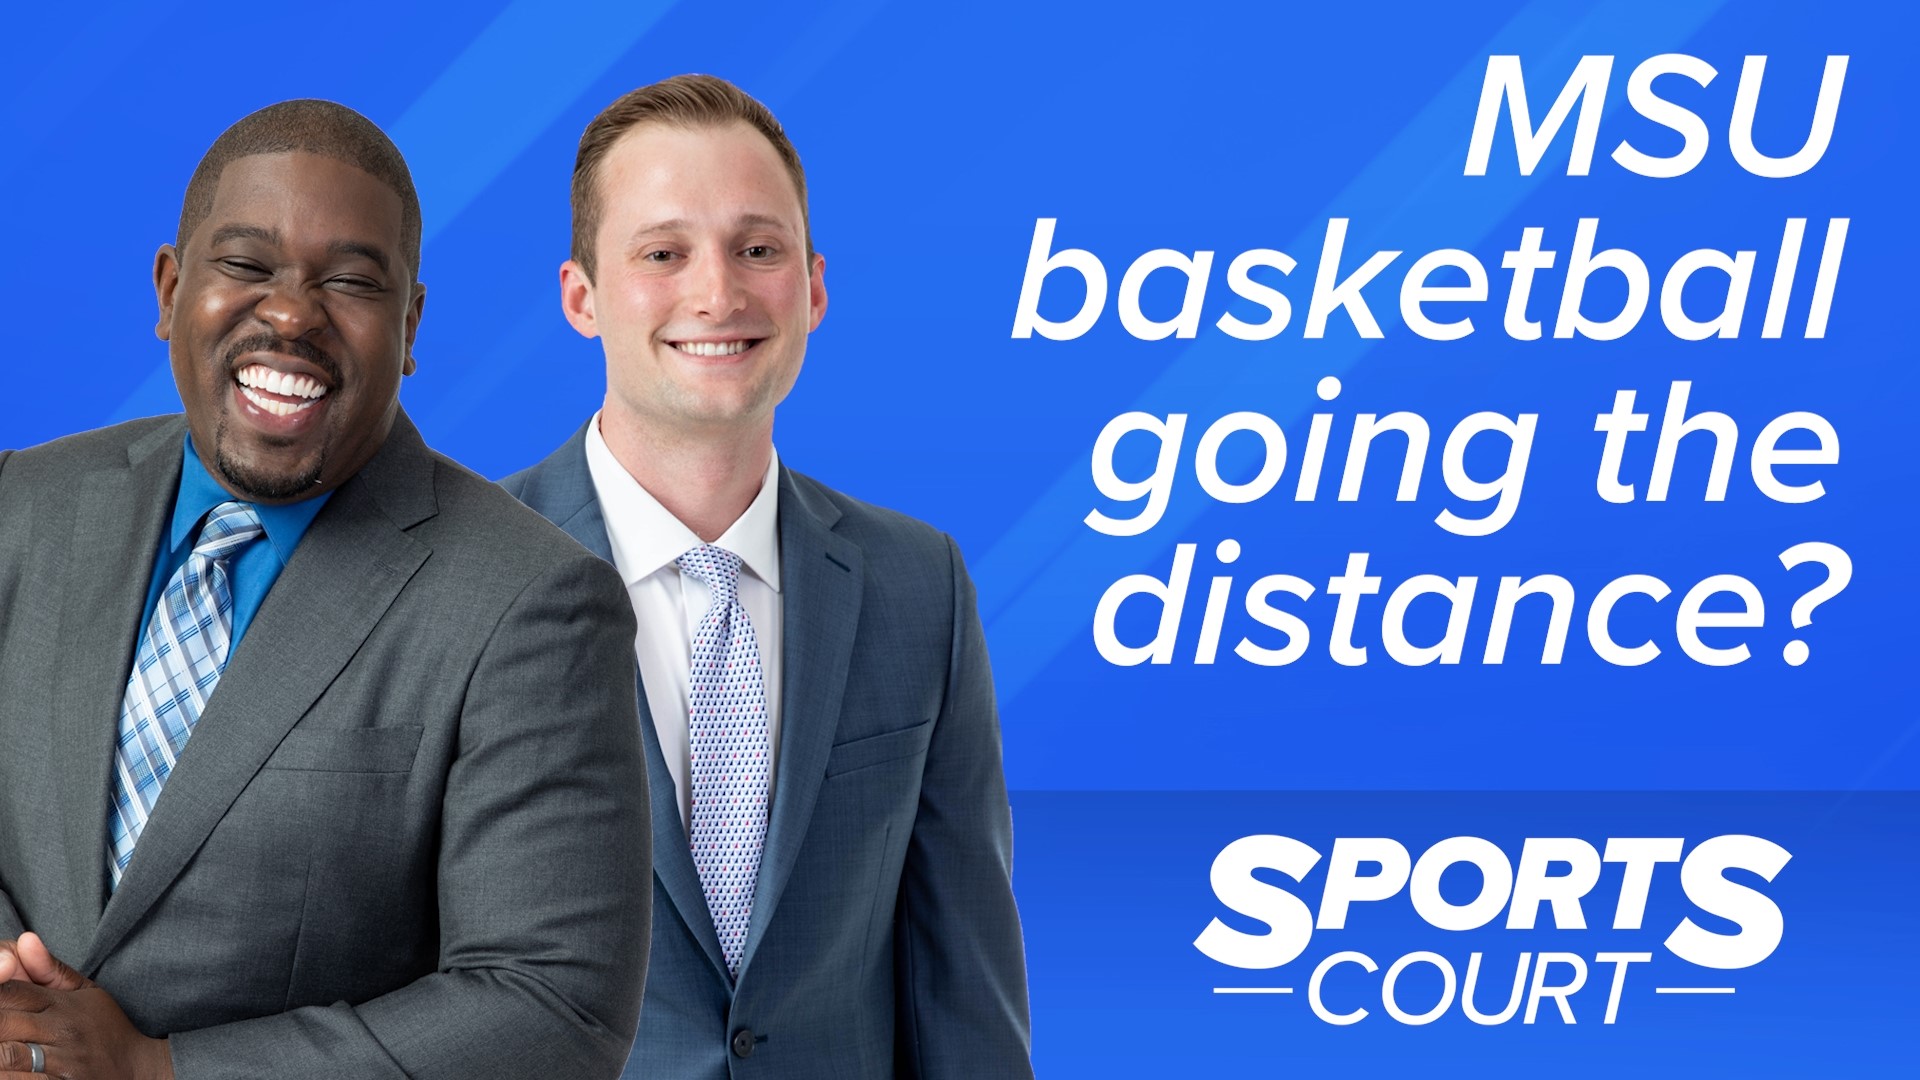 How far will Izzo's Spartans go this year? Do they have what it takes to go all the way? Or will they fizzle early? Jamal and Mark take the case to Sports Court.